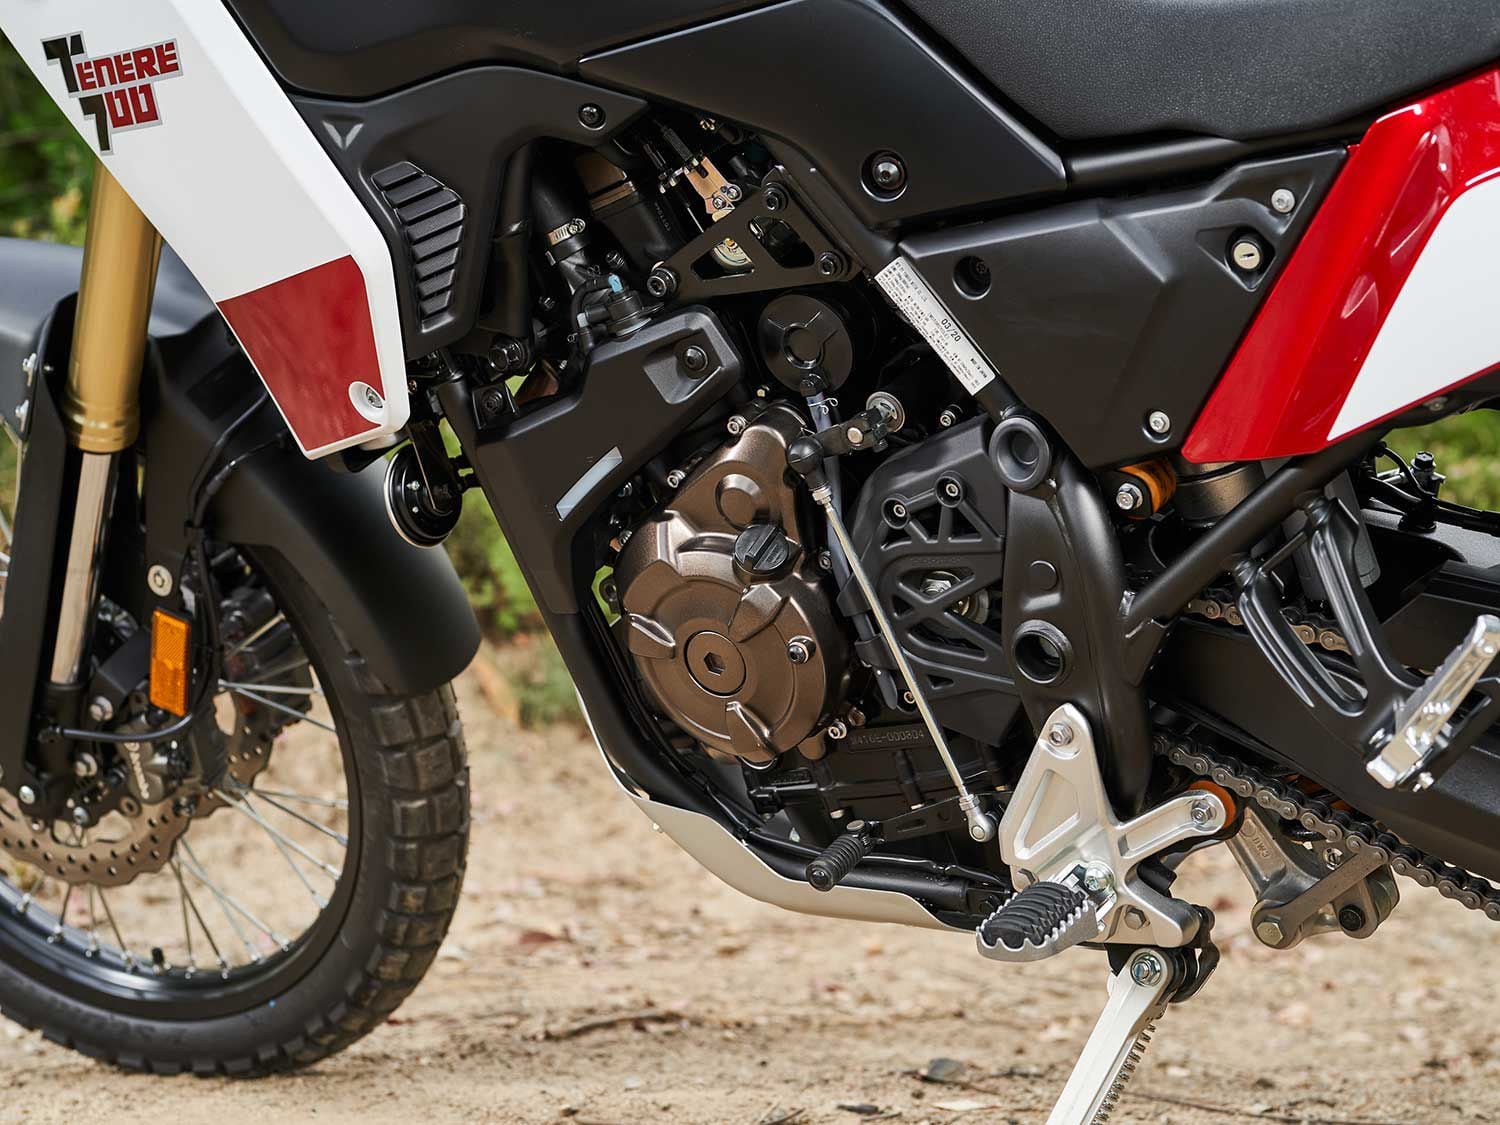 The Yamaha’s compact CP2-generation parallel-twin makes for a compact motorcycle.